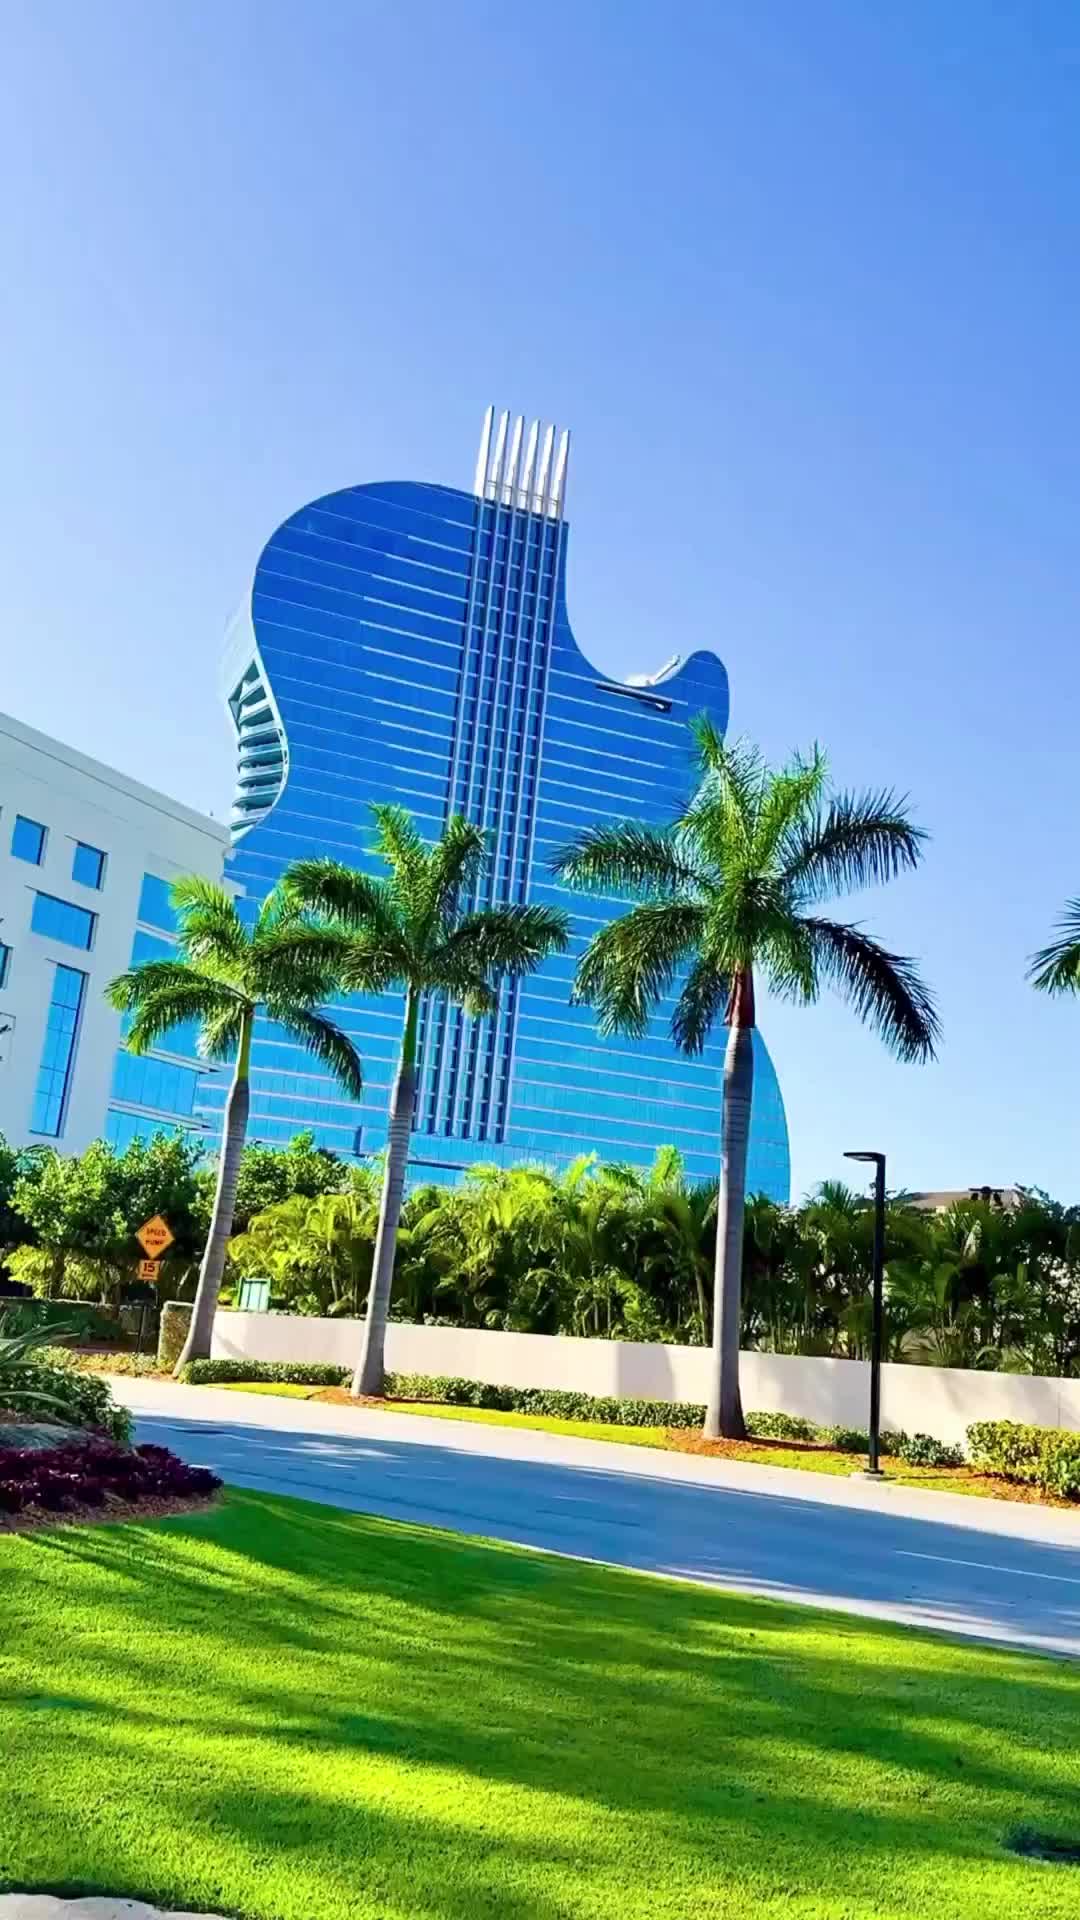 The Guitar Hotel: Redefining the South Florida Skyline